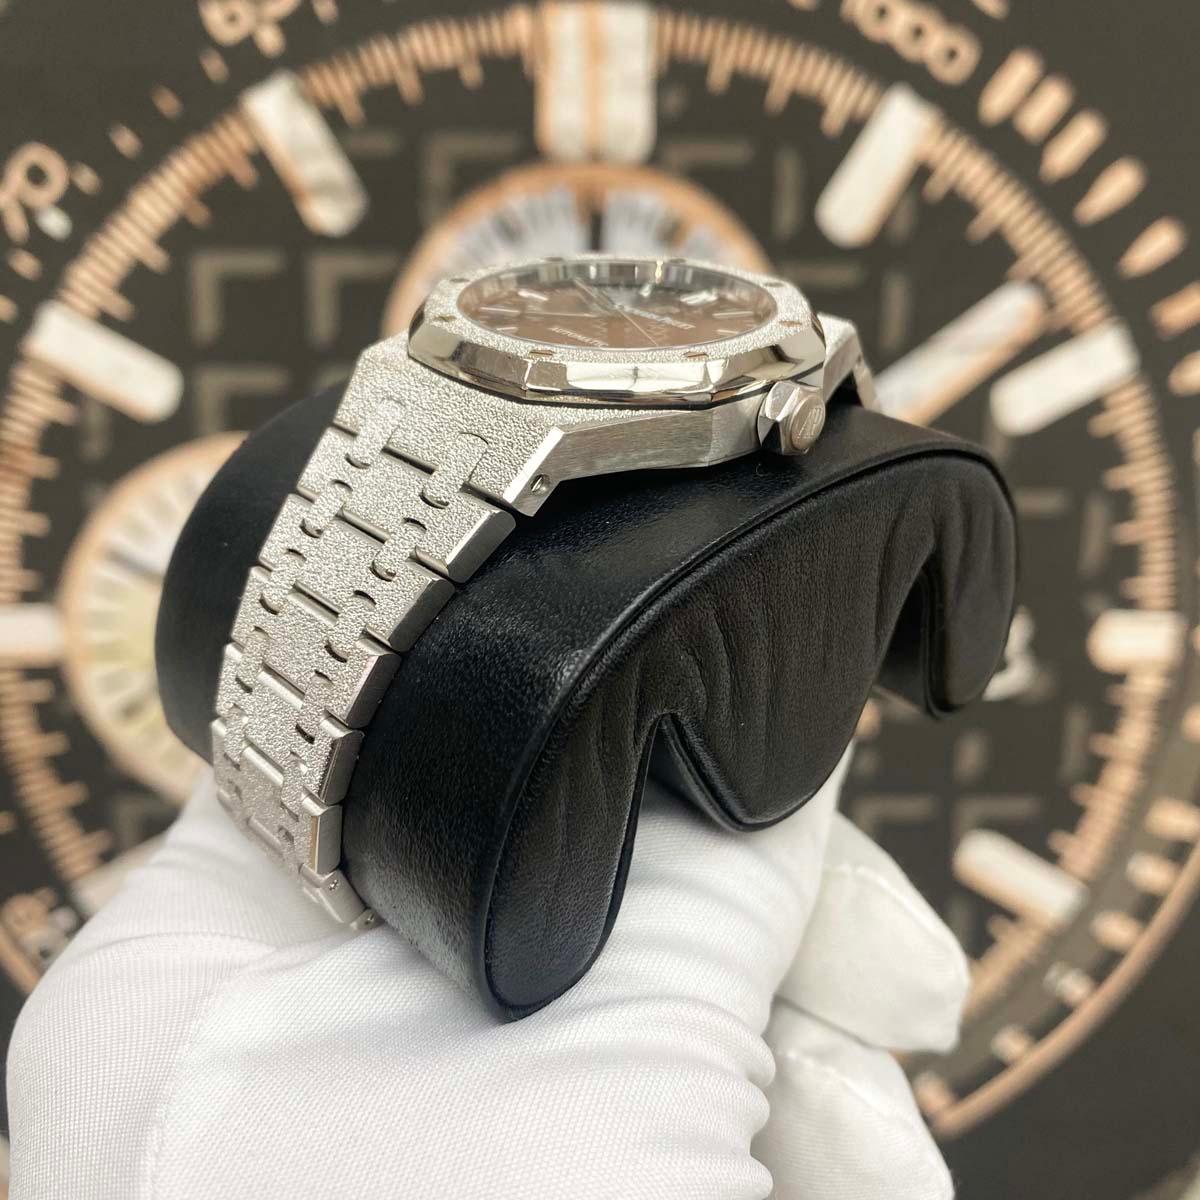 Audemars Piguet Royal Oak Frosted 37mm 15454BC.GG.1259BC.03 Black Dial Pre-Owned - Gotham Trading 